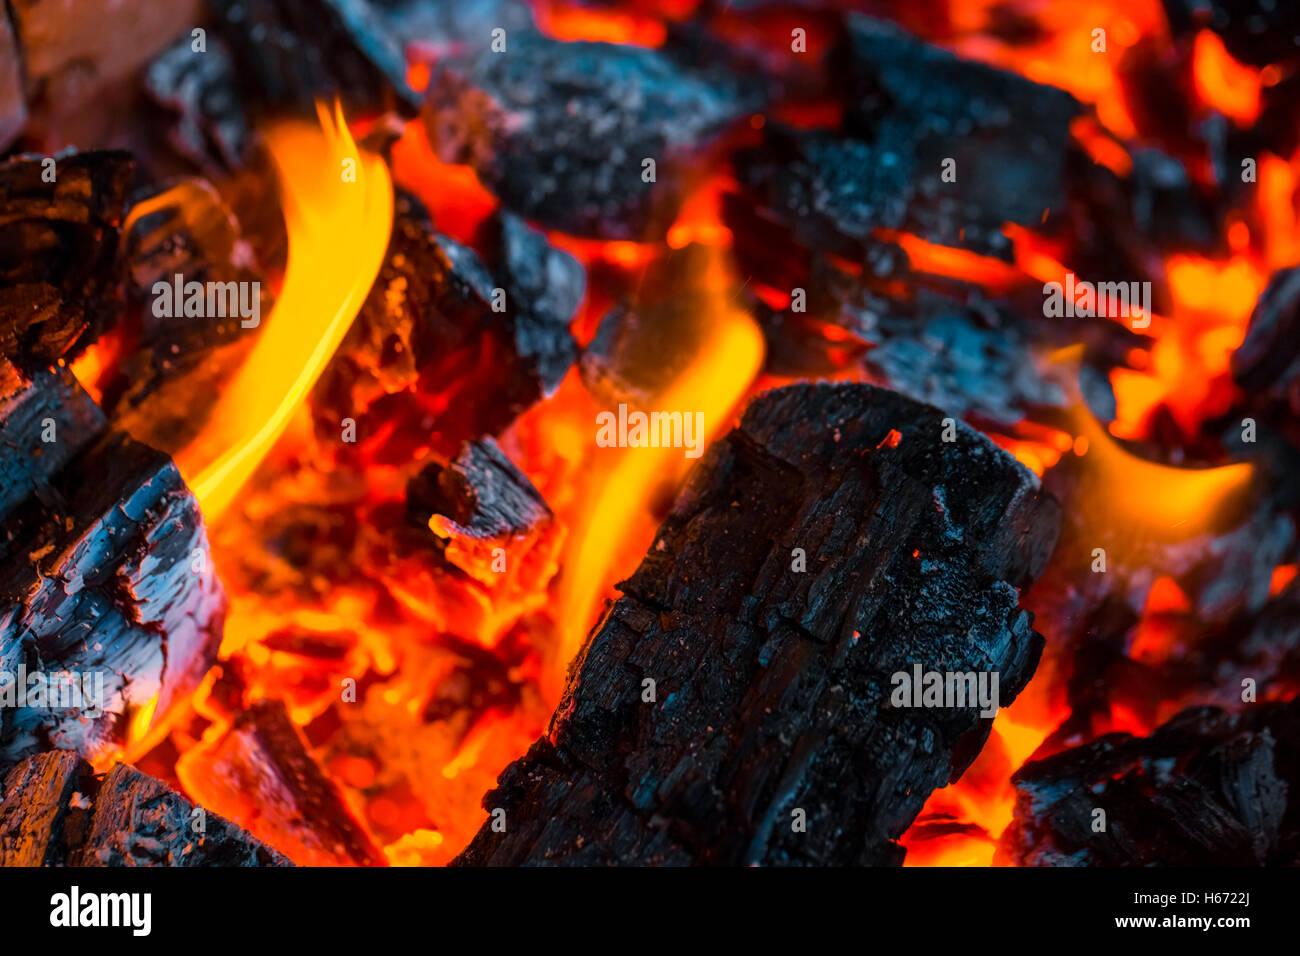 Beautiful burning fire flame background and coals Stock Photo